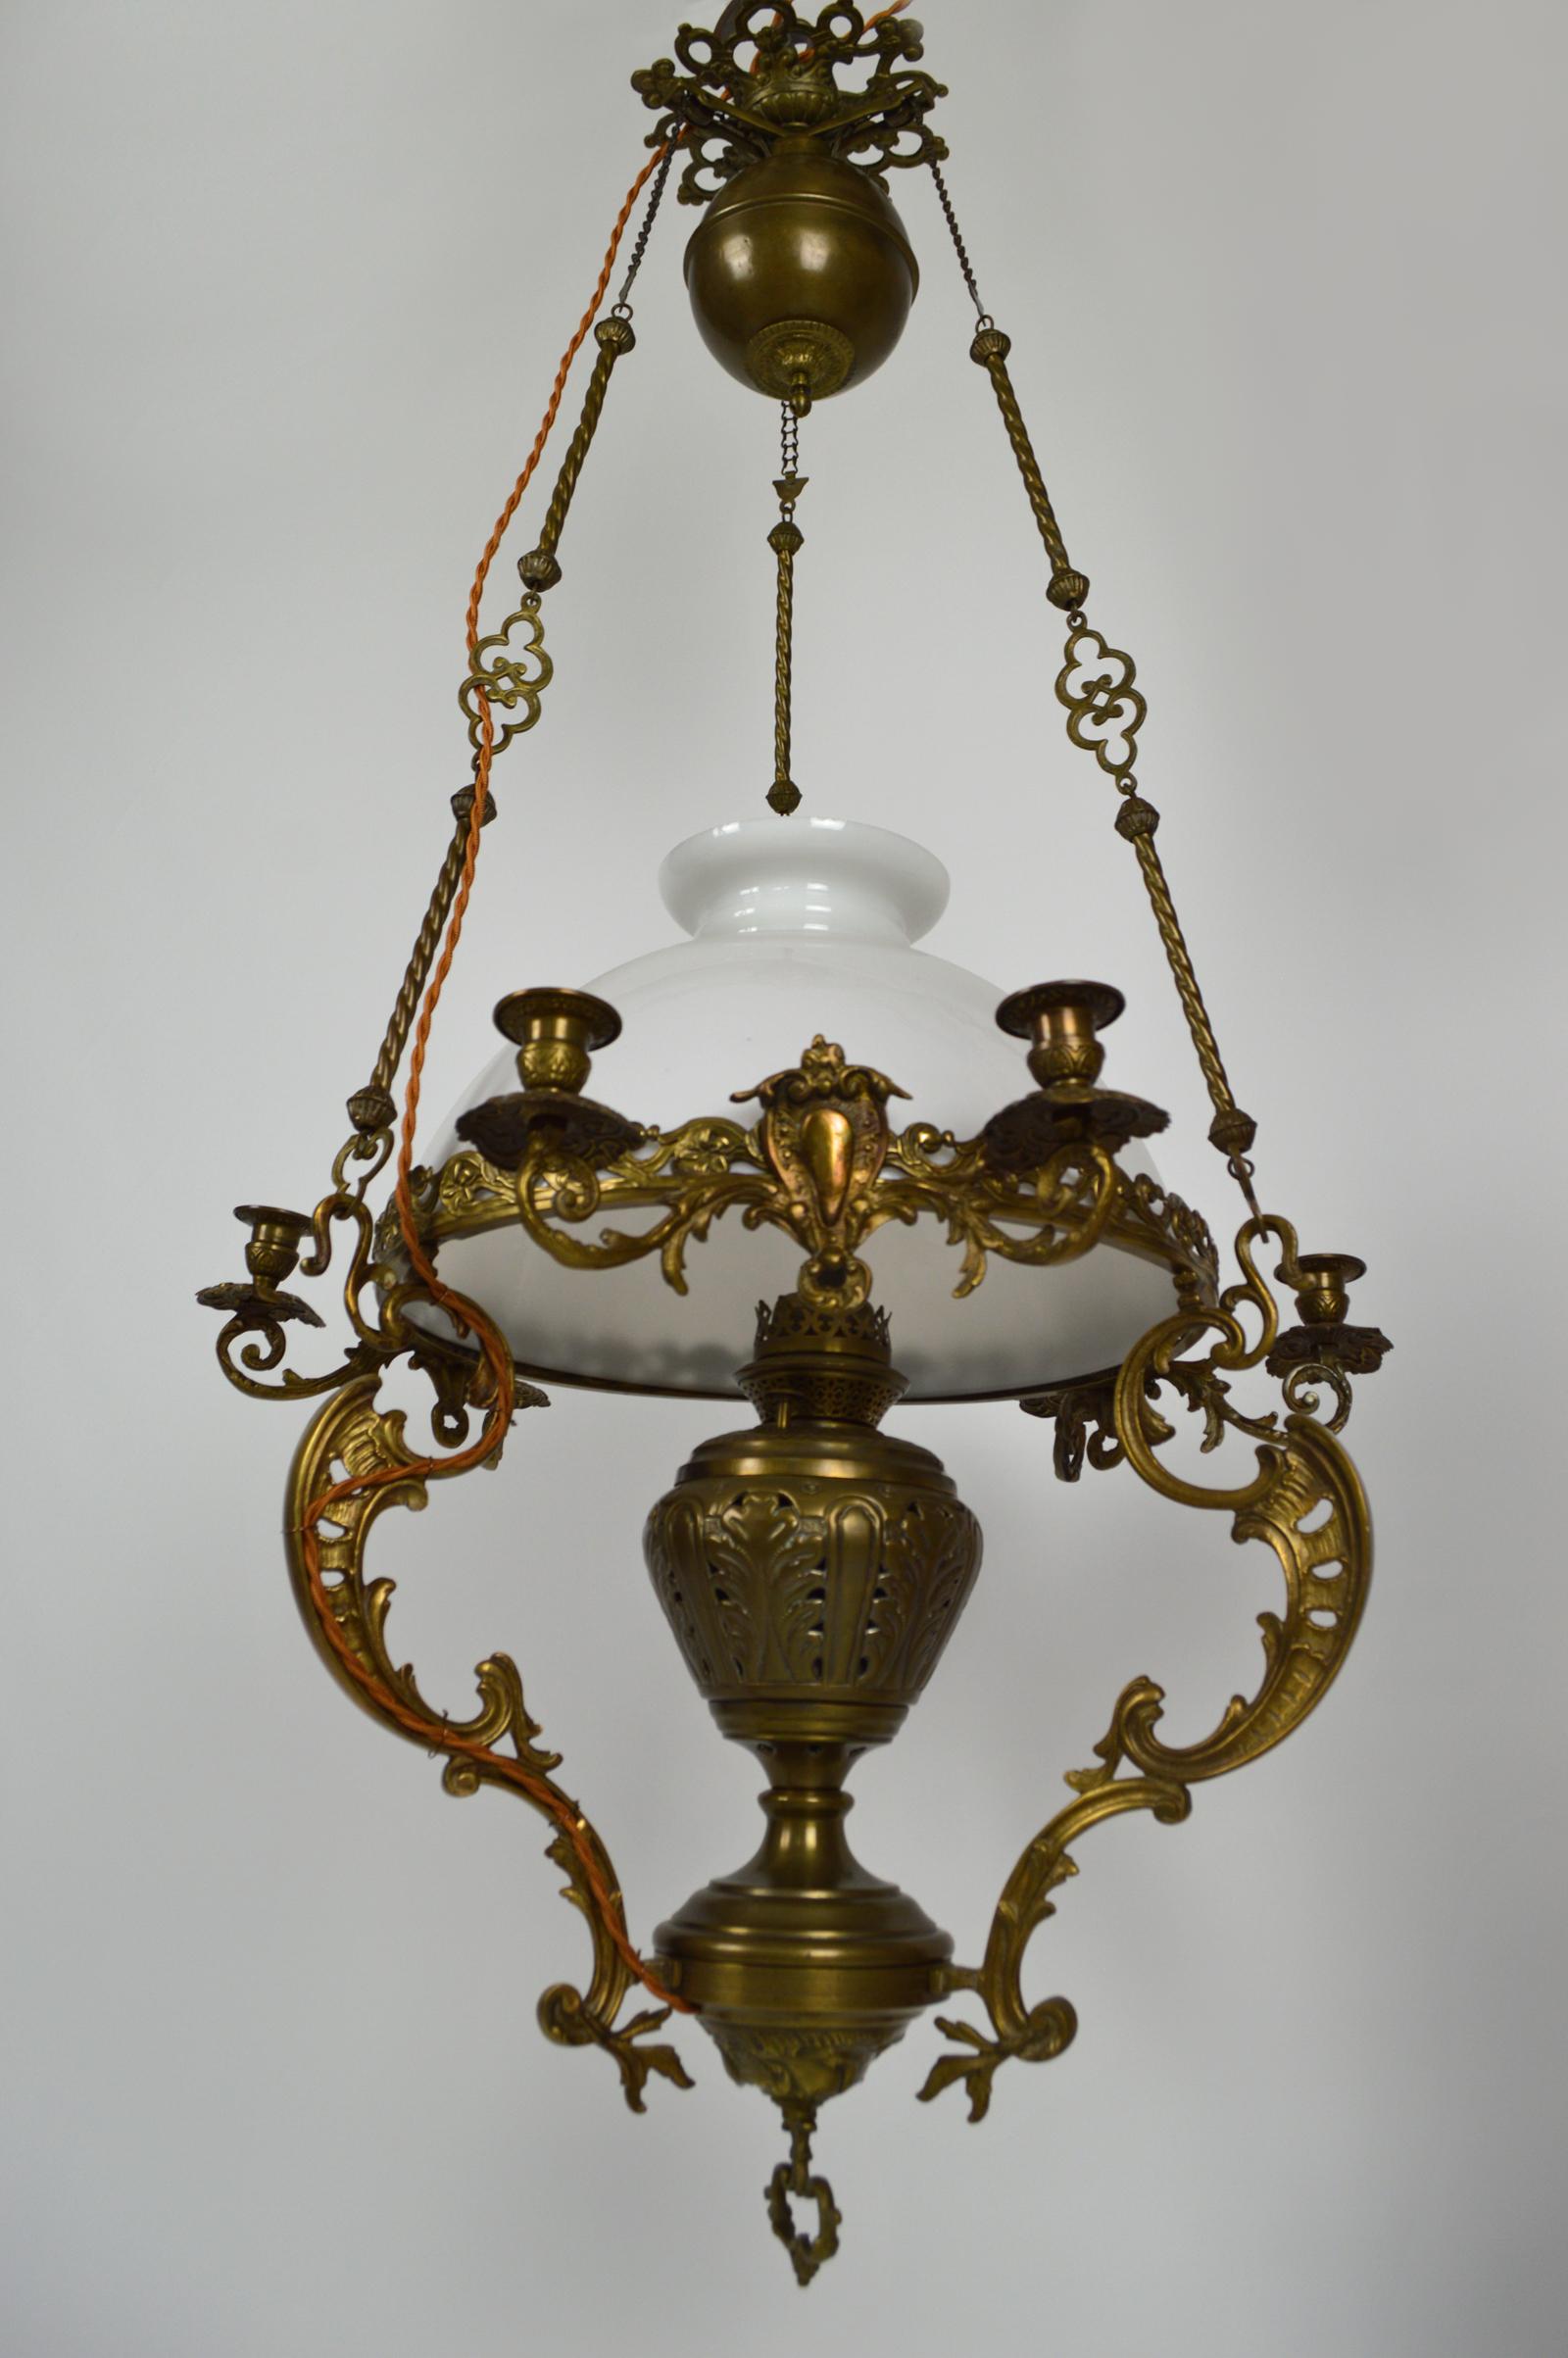 This large chandelier with drop-down suspension in bronze and brass was produced in the late 19th century. It features elements of Rococo / Regency / Louis XV (candlesticks) and influences or Japanese / floral Art Nouveau (support of the opaline